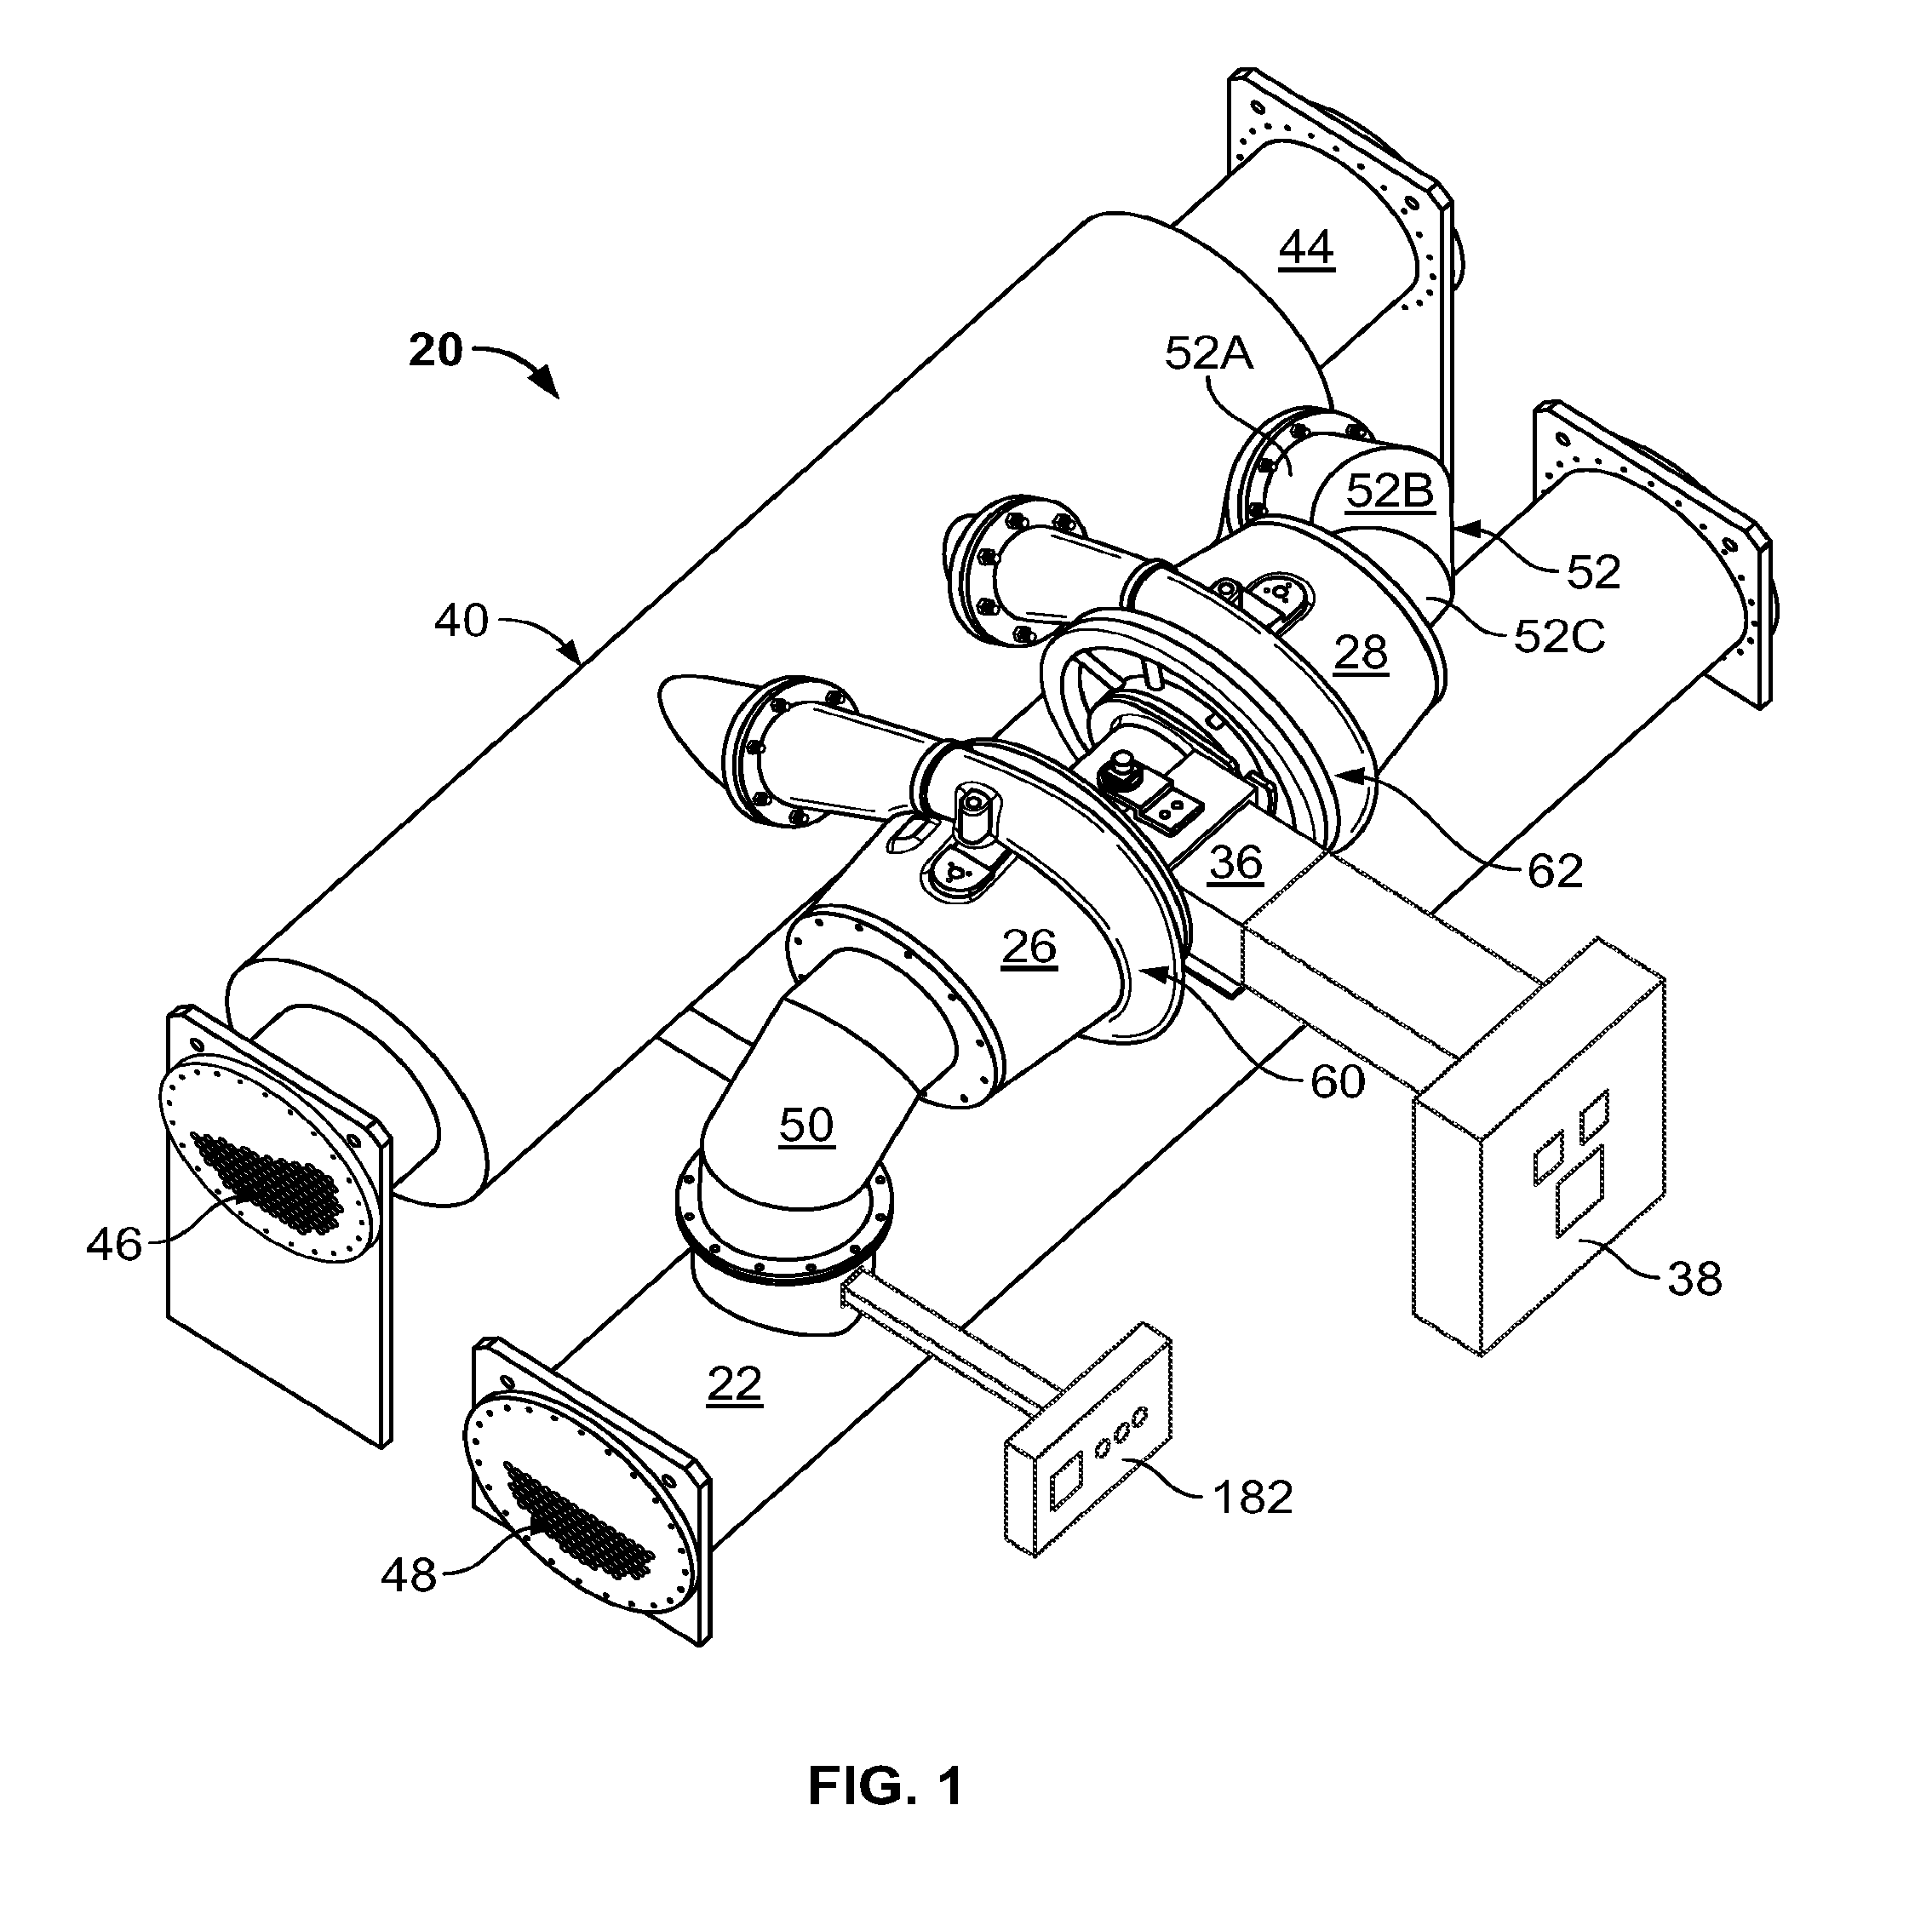 Centrifugal compressor assembly and method